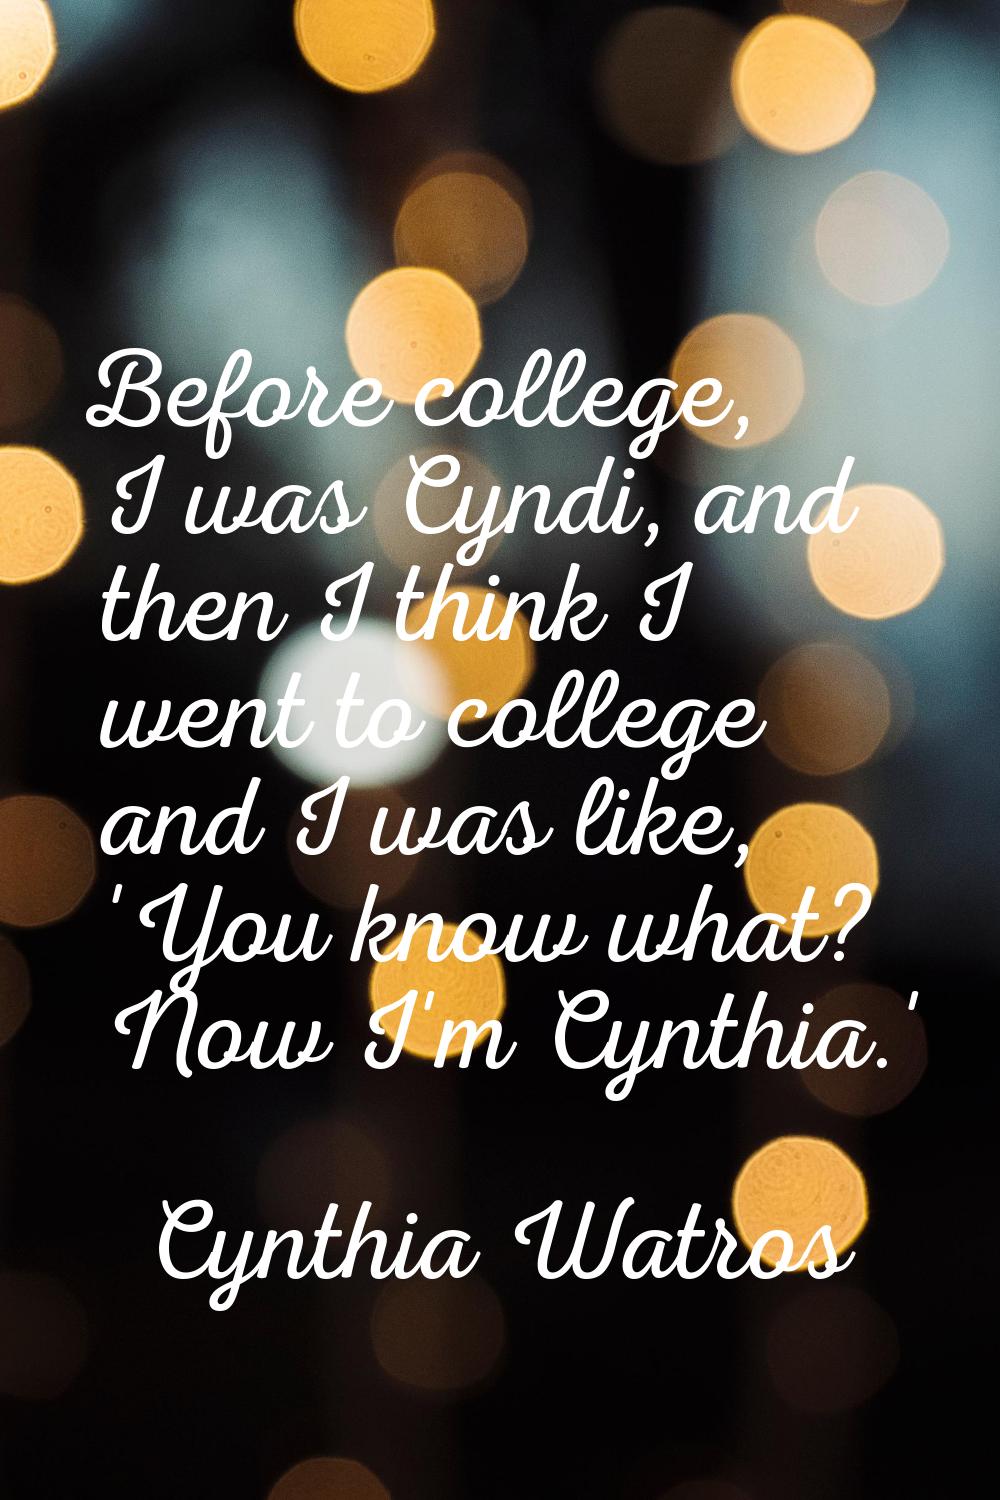 Before college, I was Cyndi, and then I think I went to college and I was like, 'You know what? Now